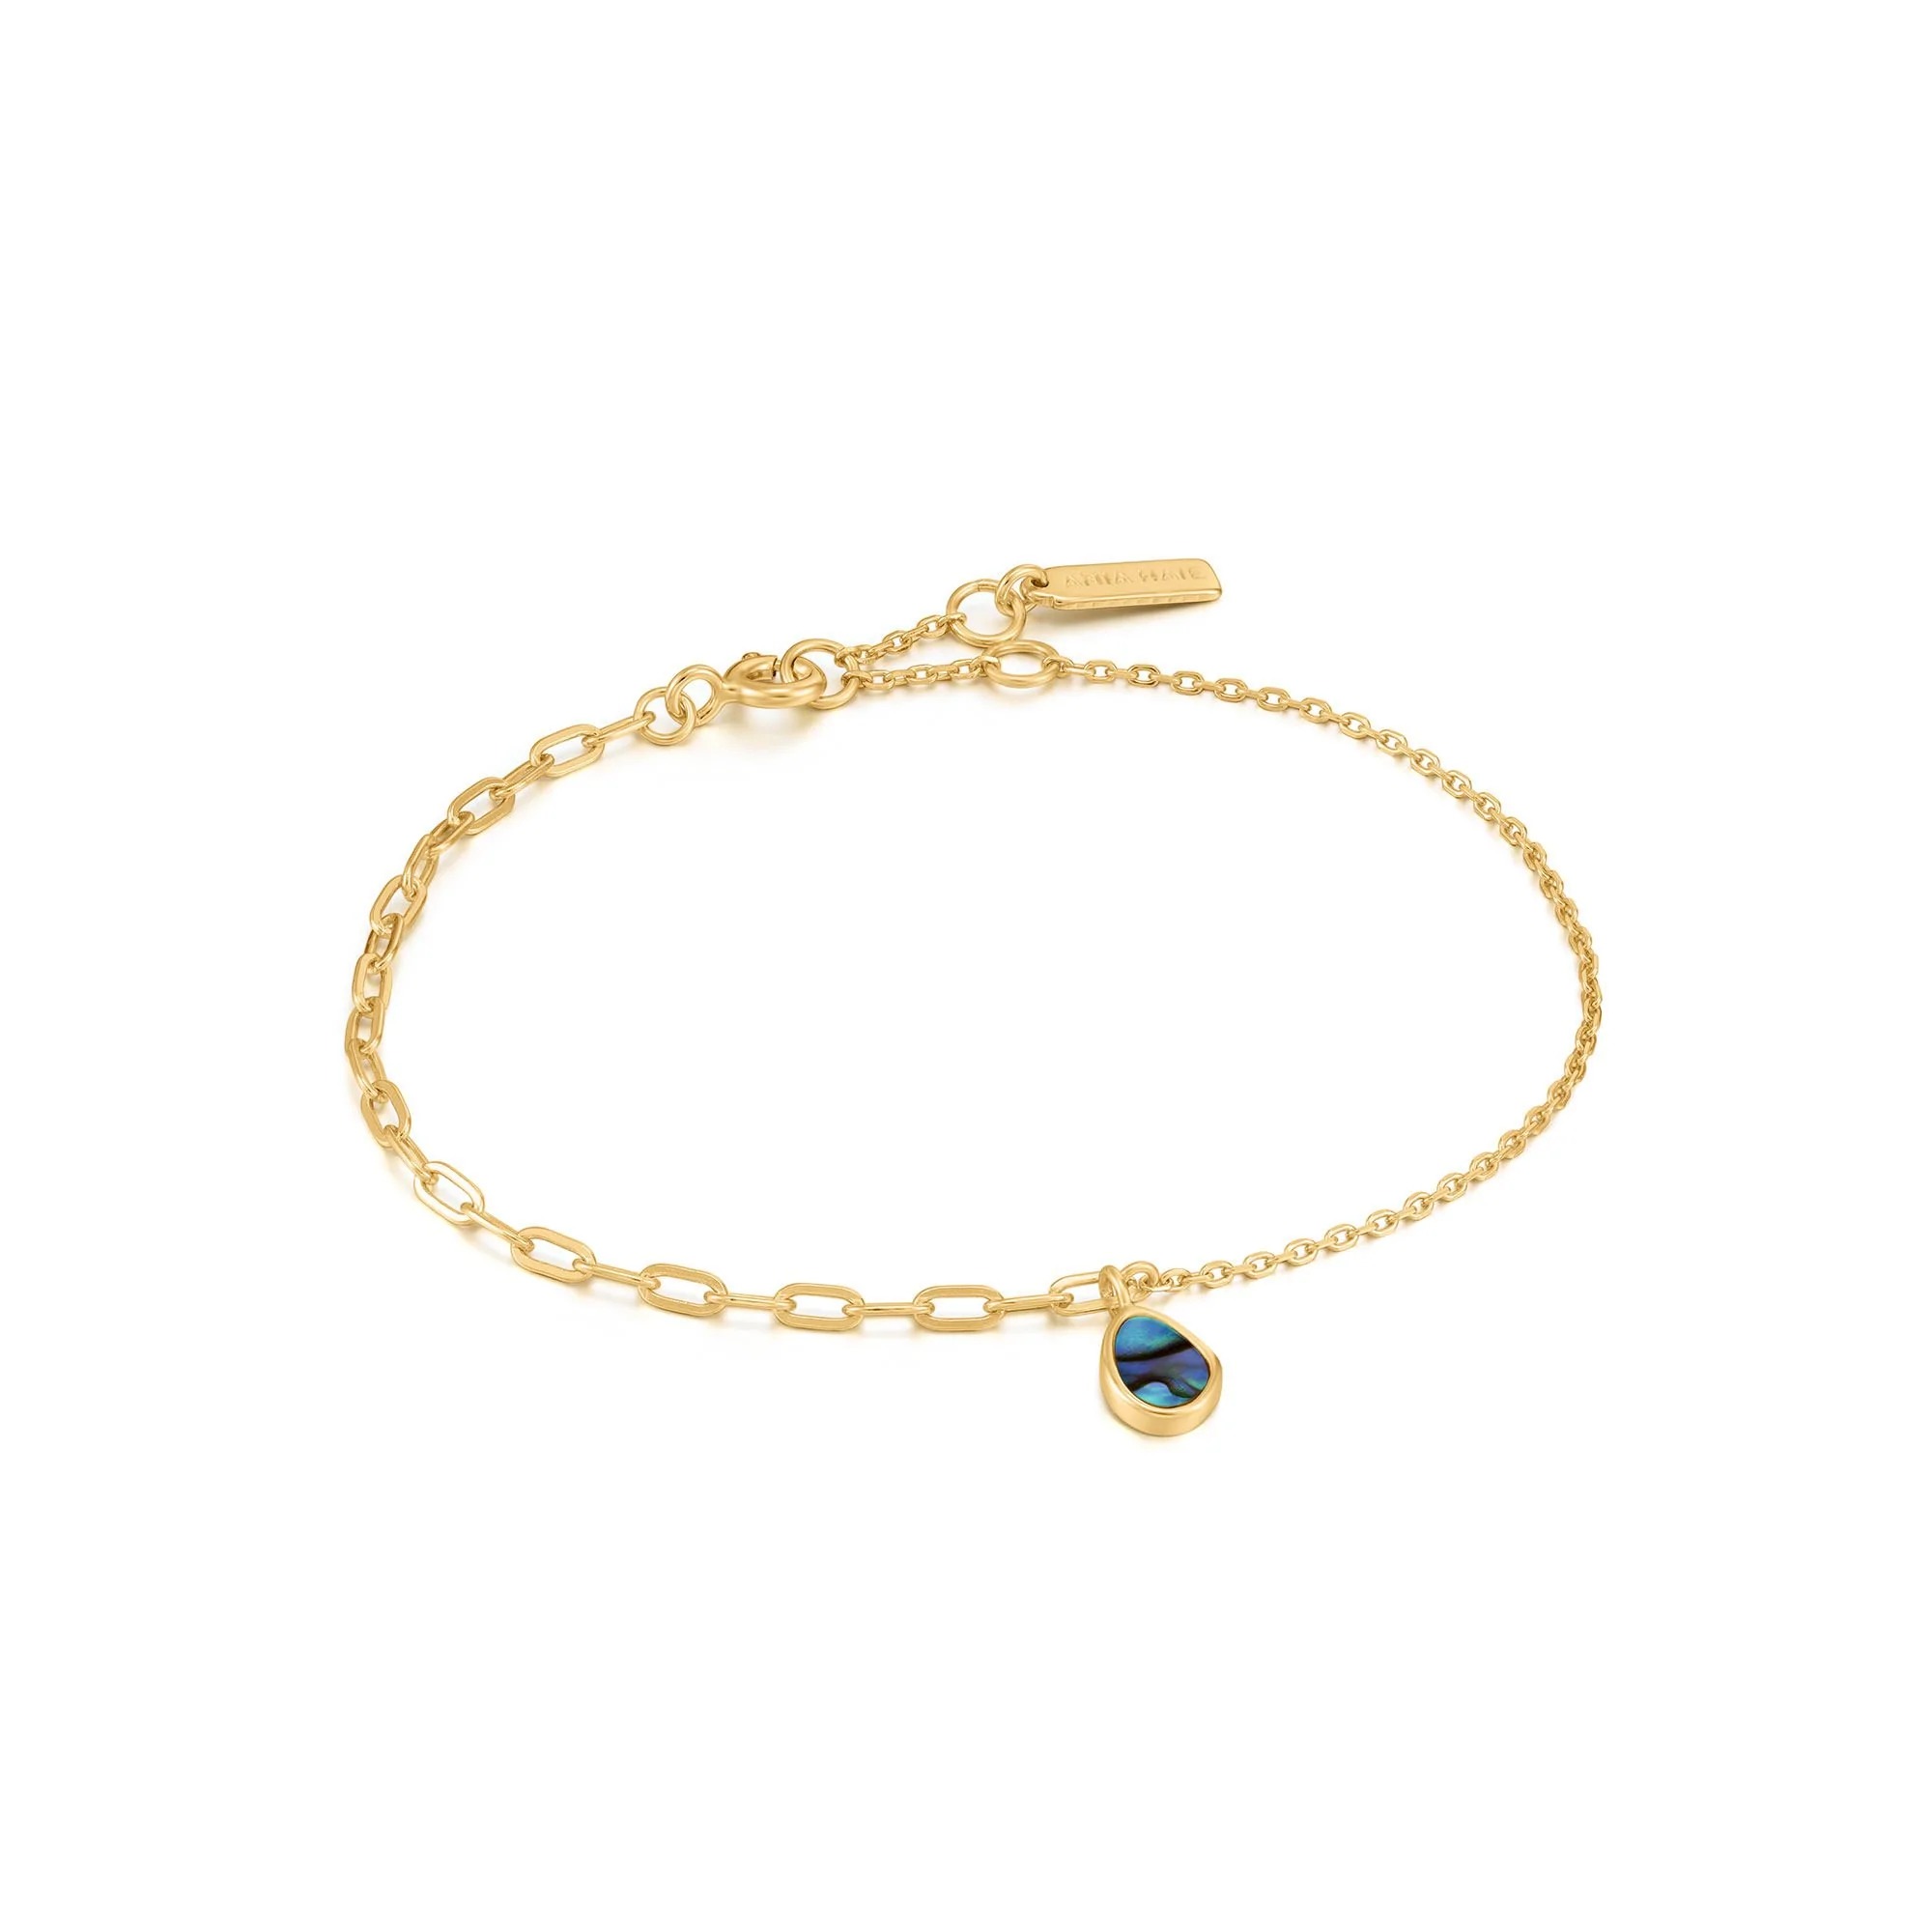 ANIA HAIE Tidal Abalone Mixed Link Bracelet, Gold-Plated